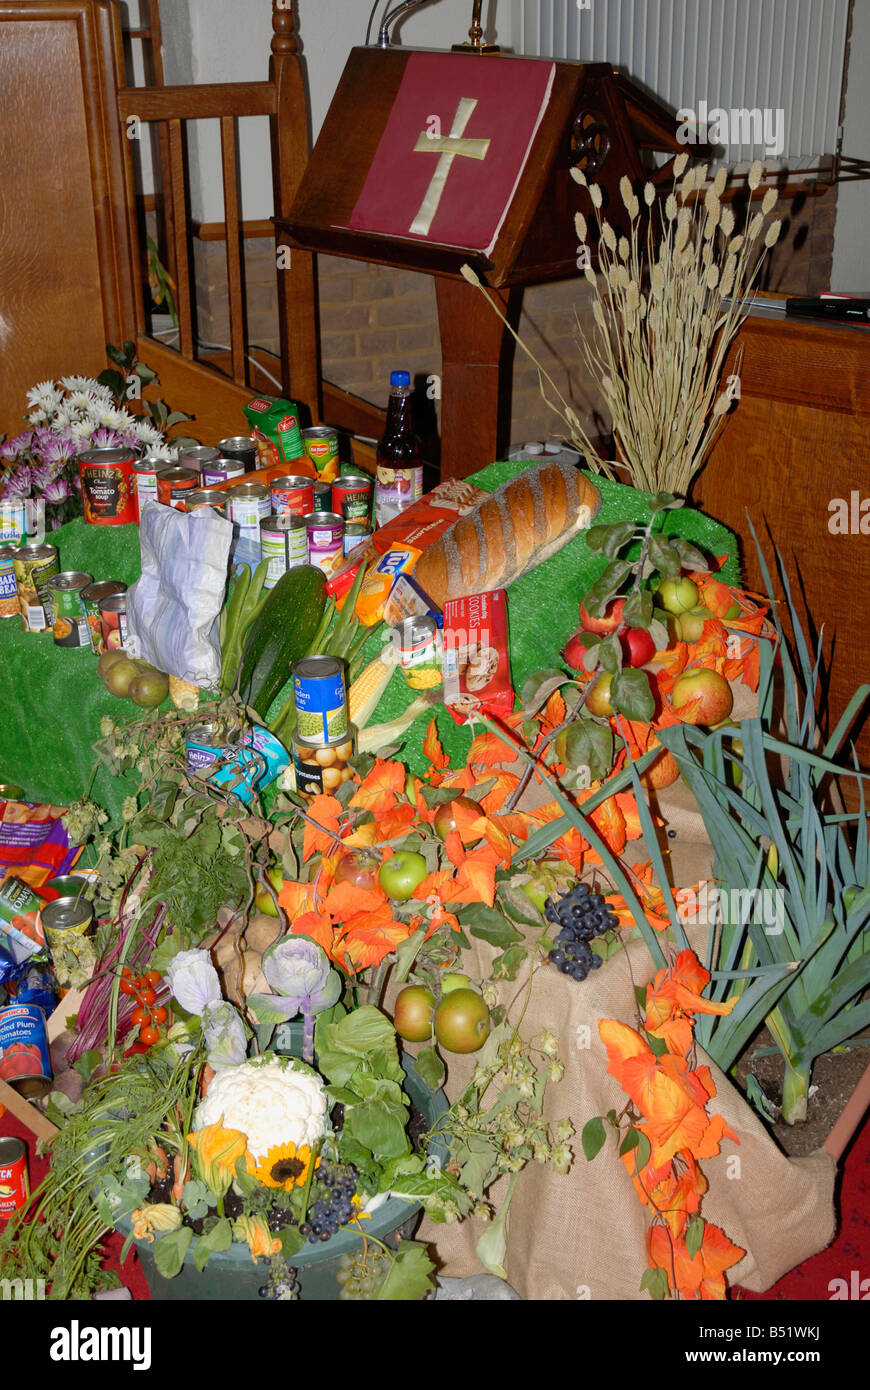 Harvest festival display of fruit, vegetables and tinned and bottled goods in Church of England church with lectern and cross Stock Photo